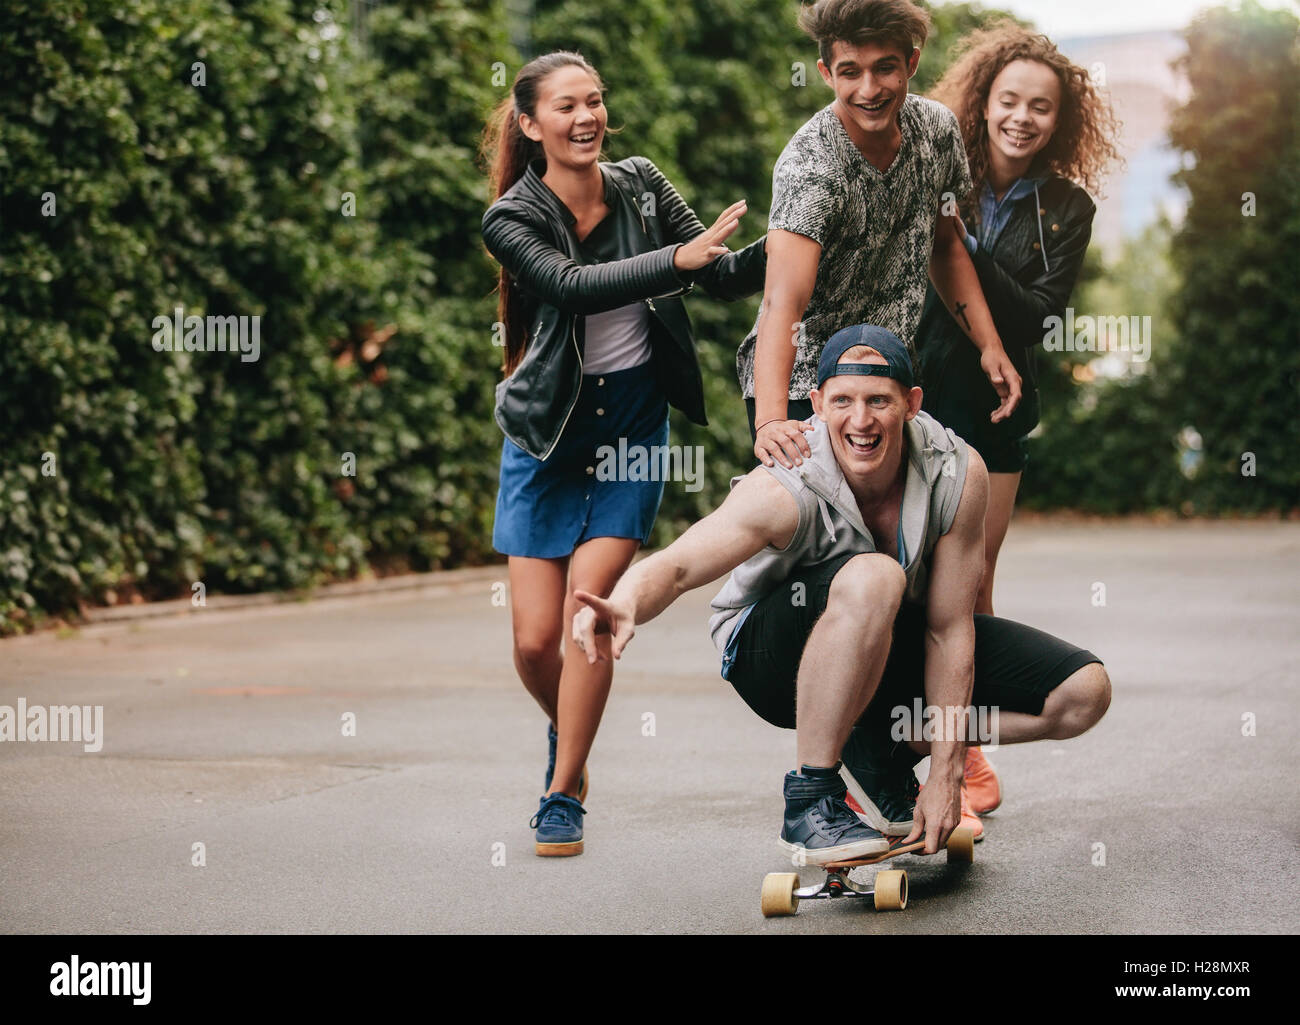 Full length shot of young men on skateboard with women friends pushing them. Group of teenagers enjoying outdoors with skateboar Stock Photo